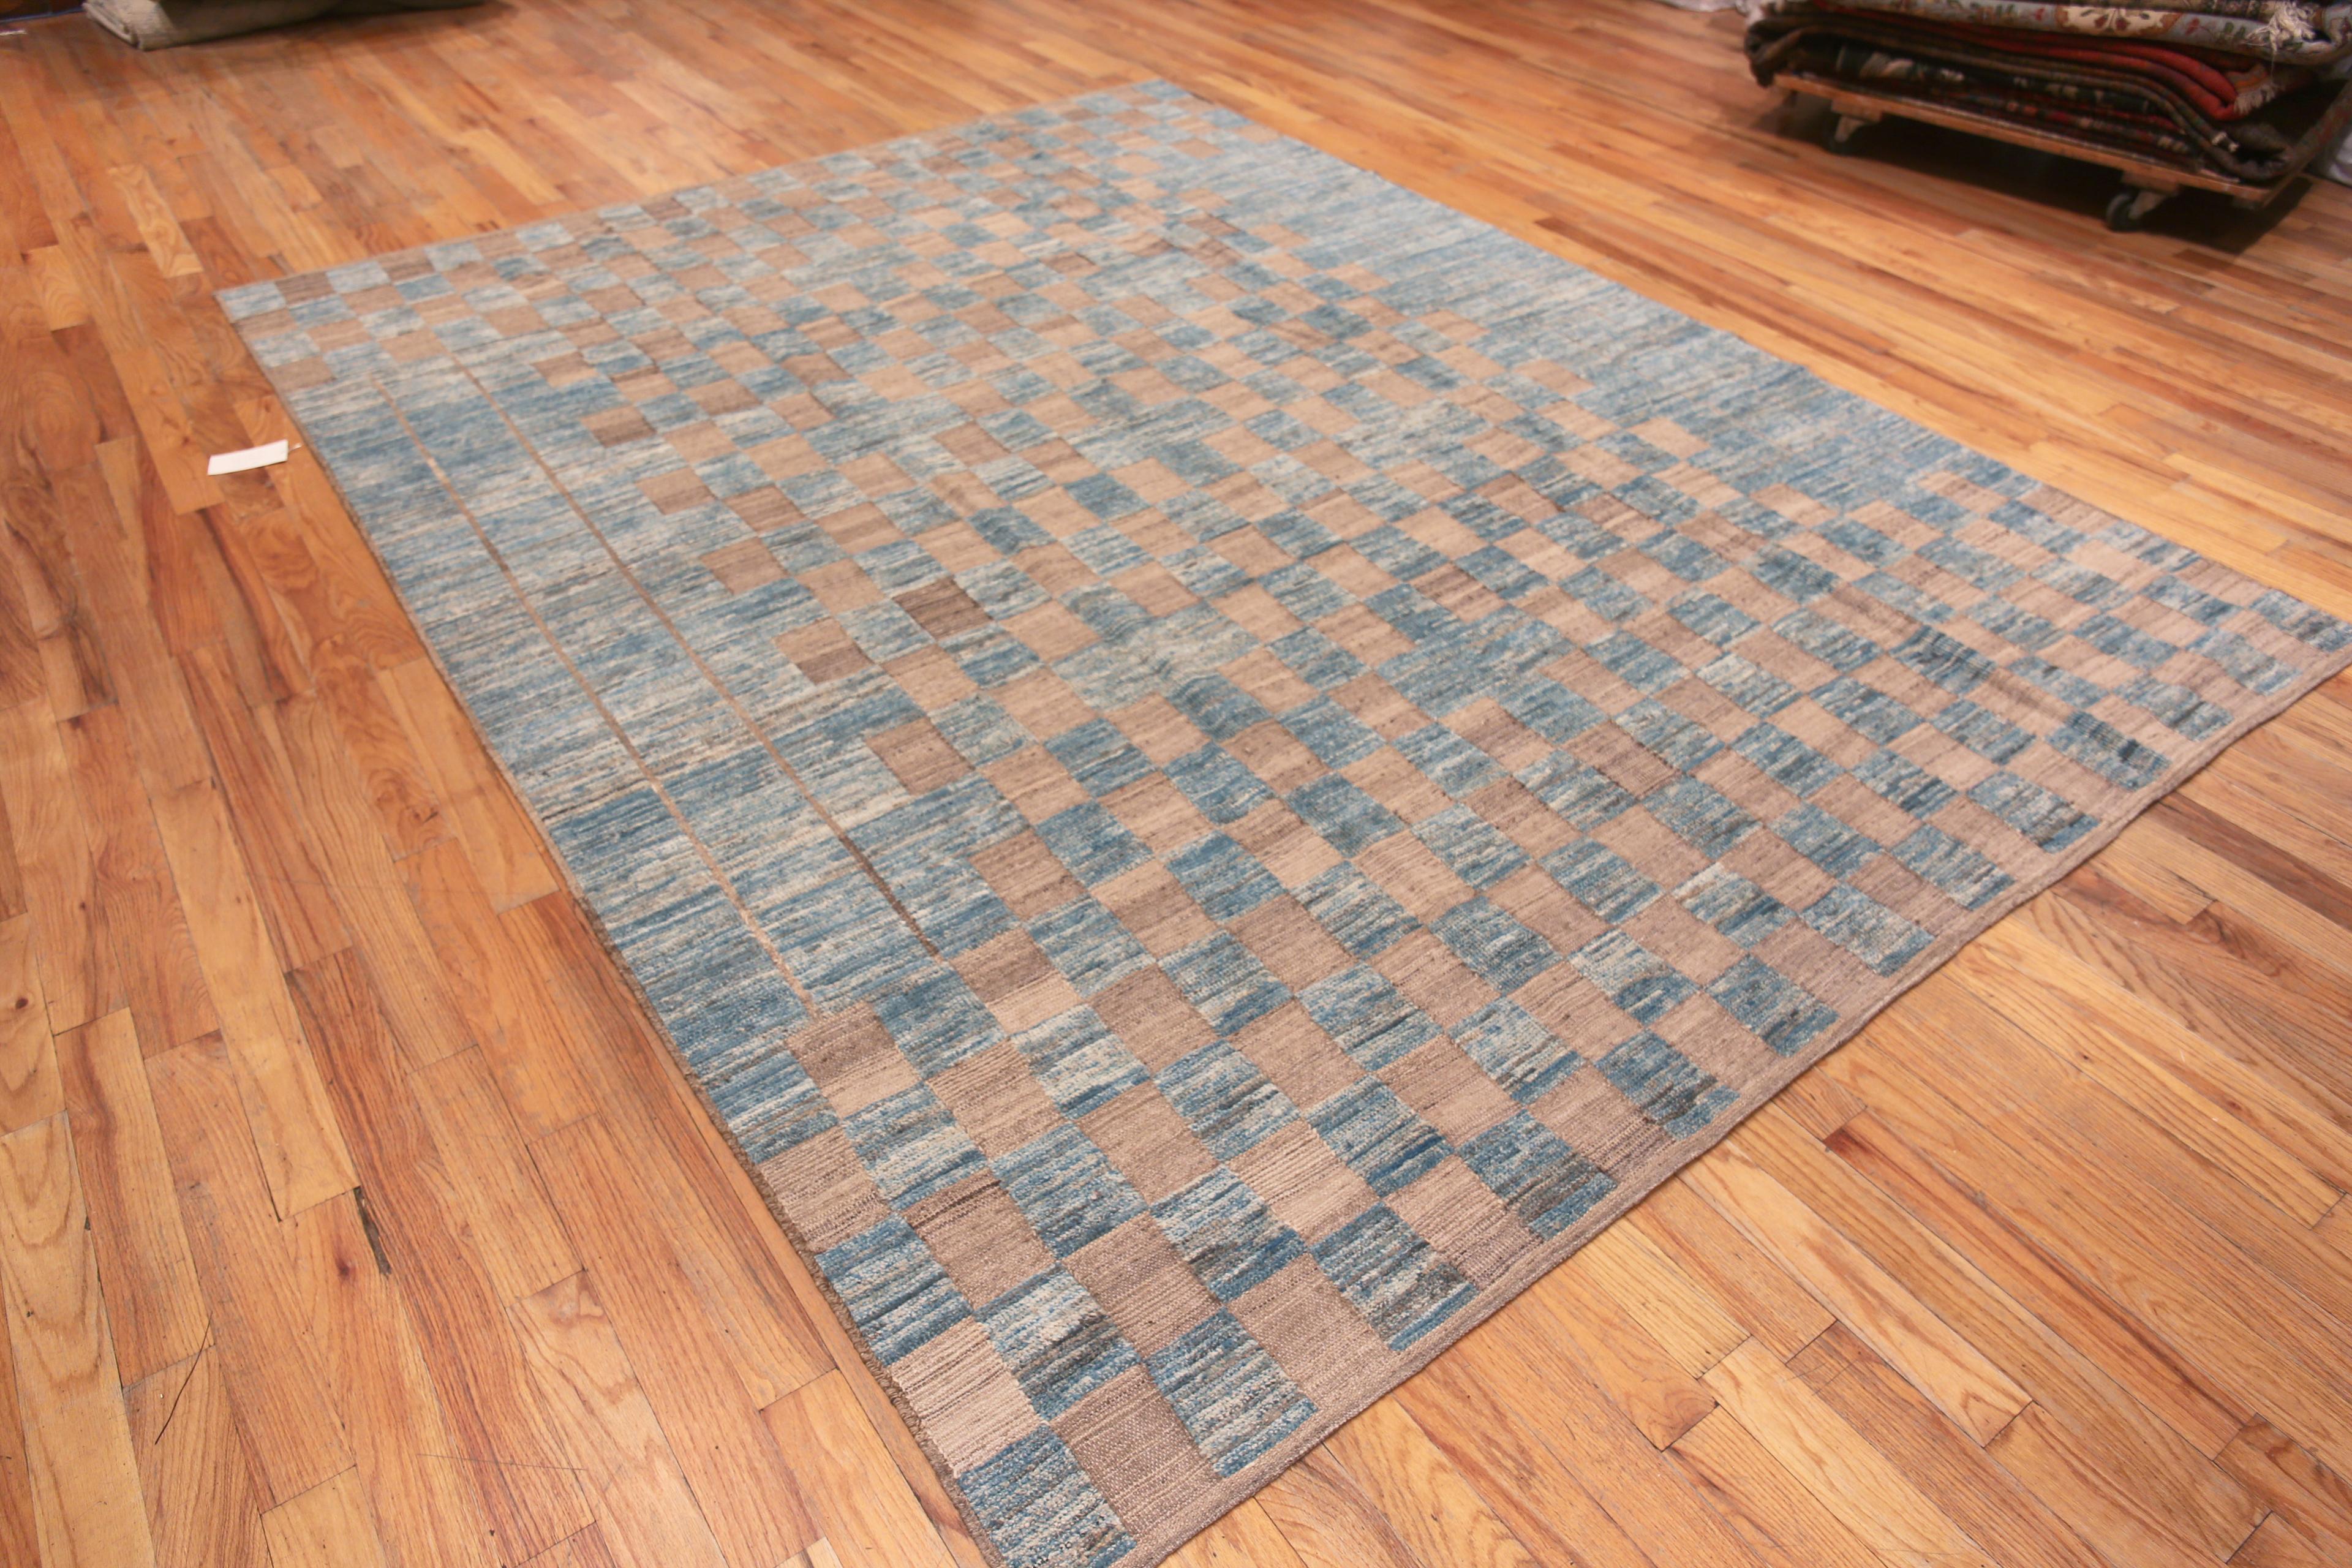 Beautiful And Artistic Modern Tribal Geometric Checkboard Design Light Blue And Neutral Room Size Area Rug, Country Of Origin: Central Asia, Circa Date: Modern Rug 